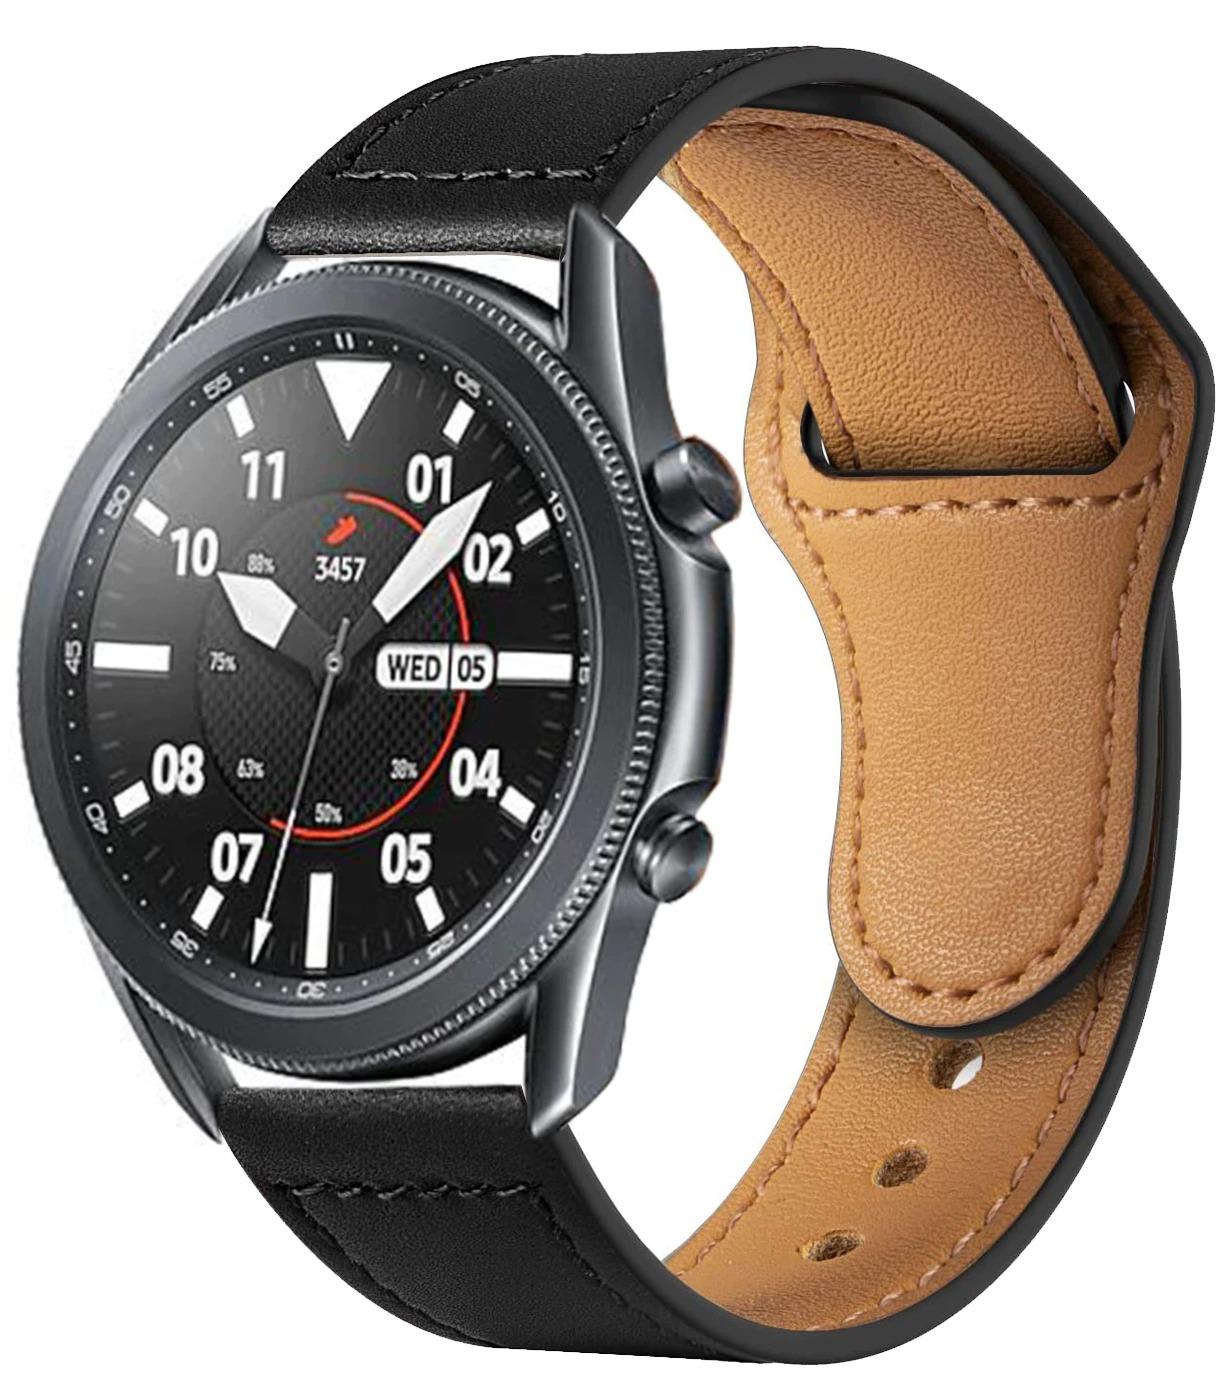 Dark Brown Leather Band for Samsung Galaxy Watch 3 Active 2 